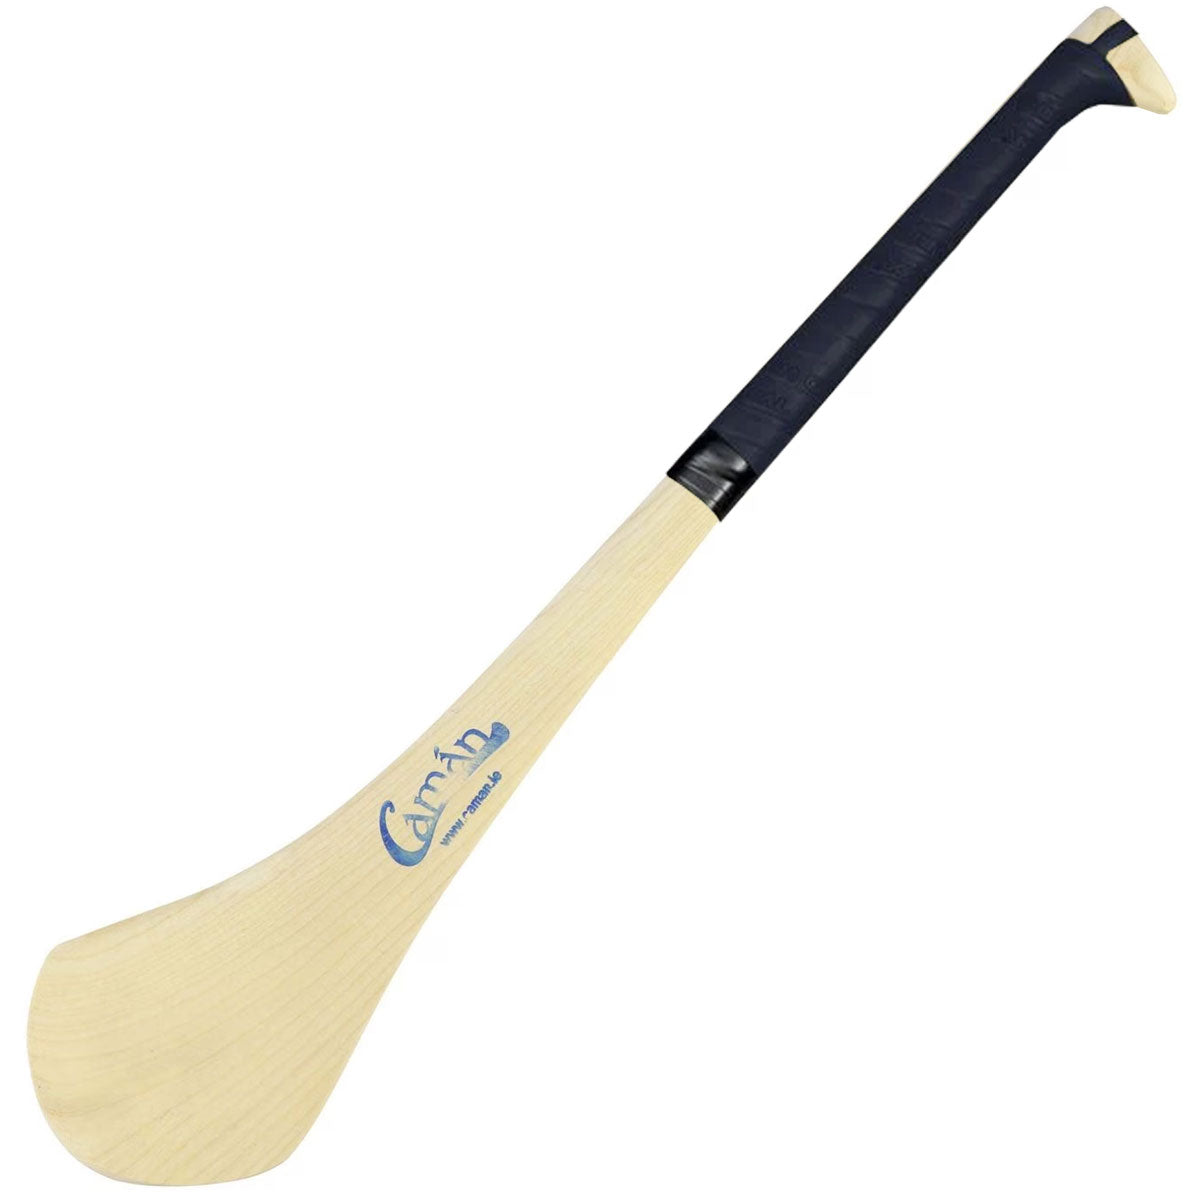 Caman Hurling Stick size 26 (Inches)